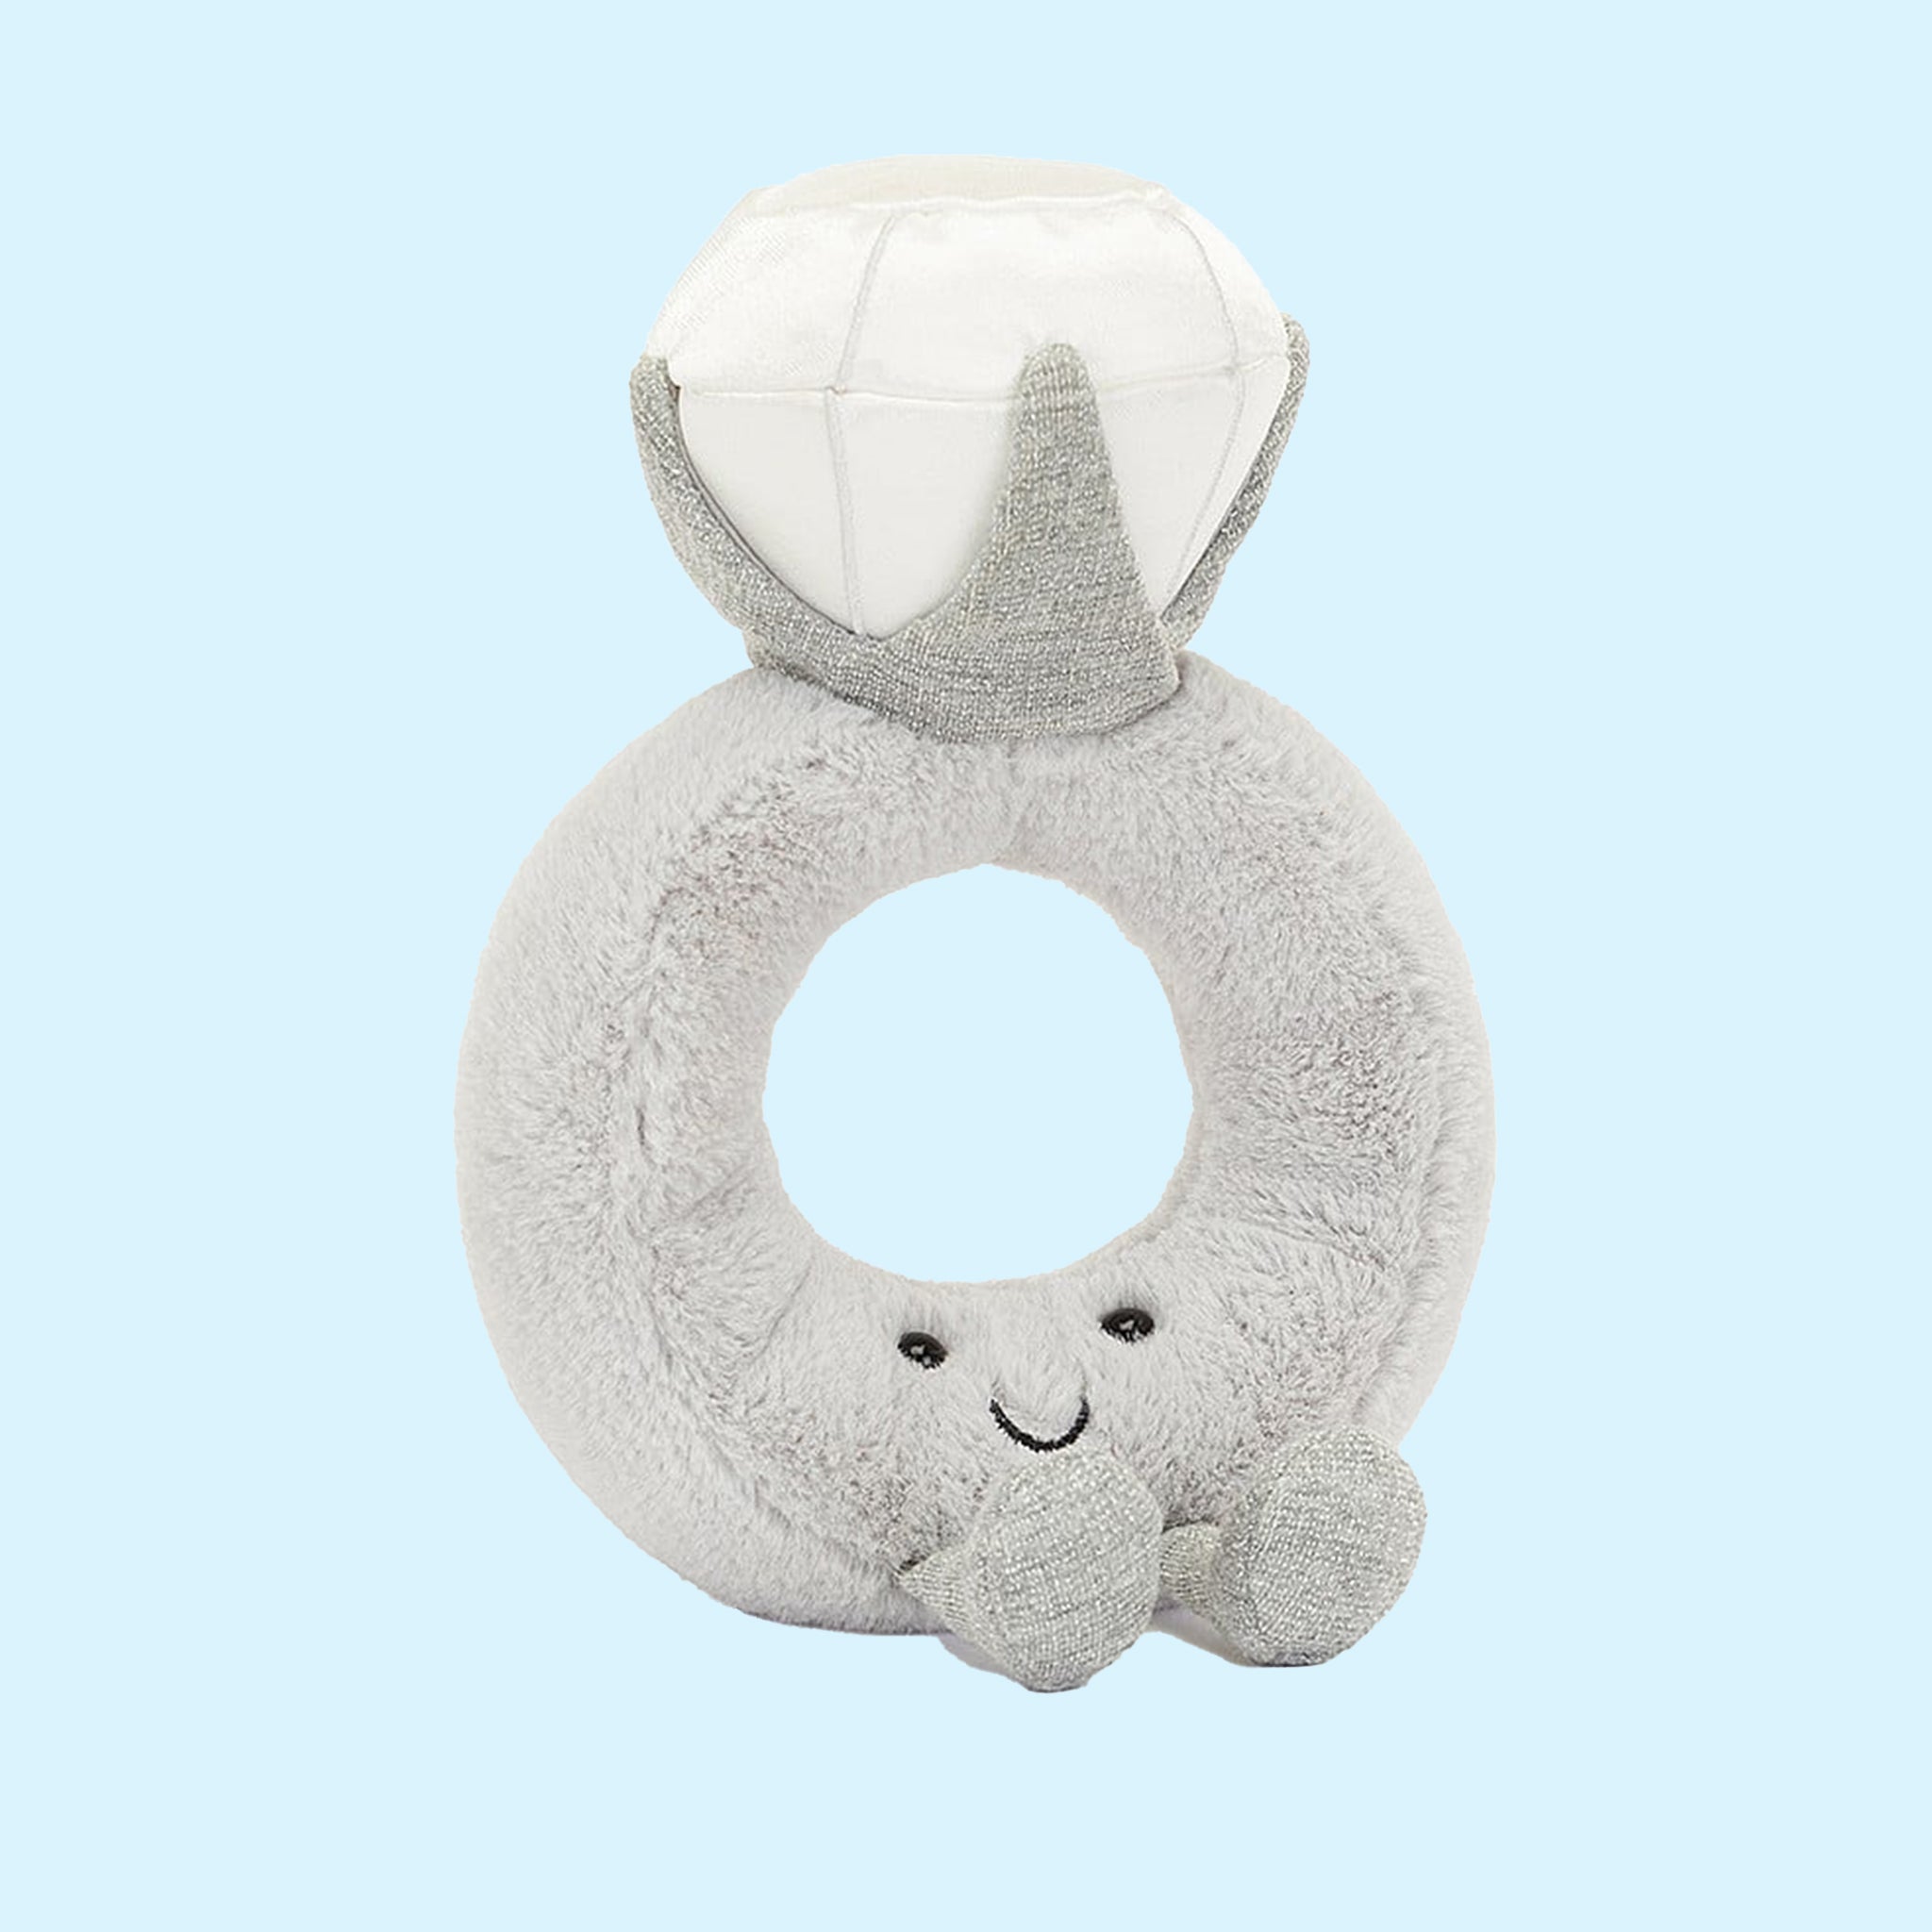 A grey stuffed toy in the shape of a diamond ring with a grey band and a white diamond shape along with a smiling face and feet on the front. 